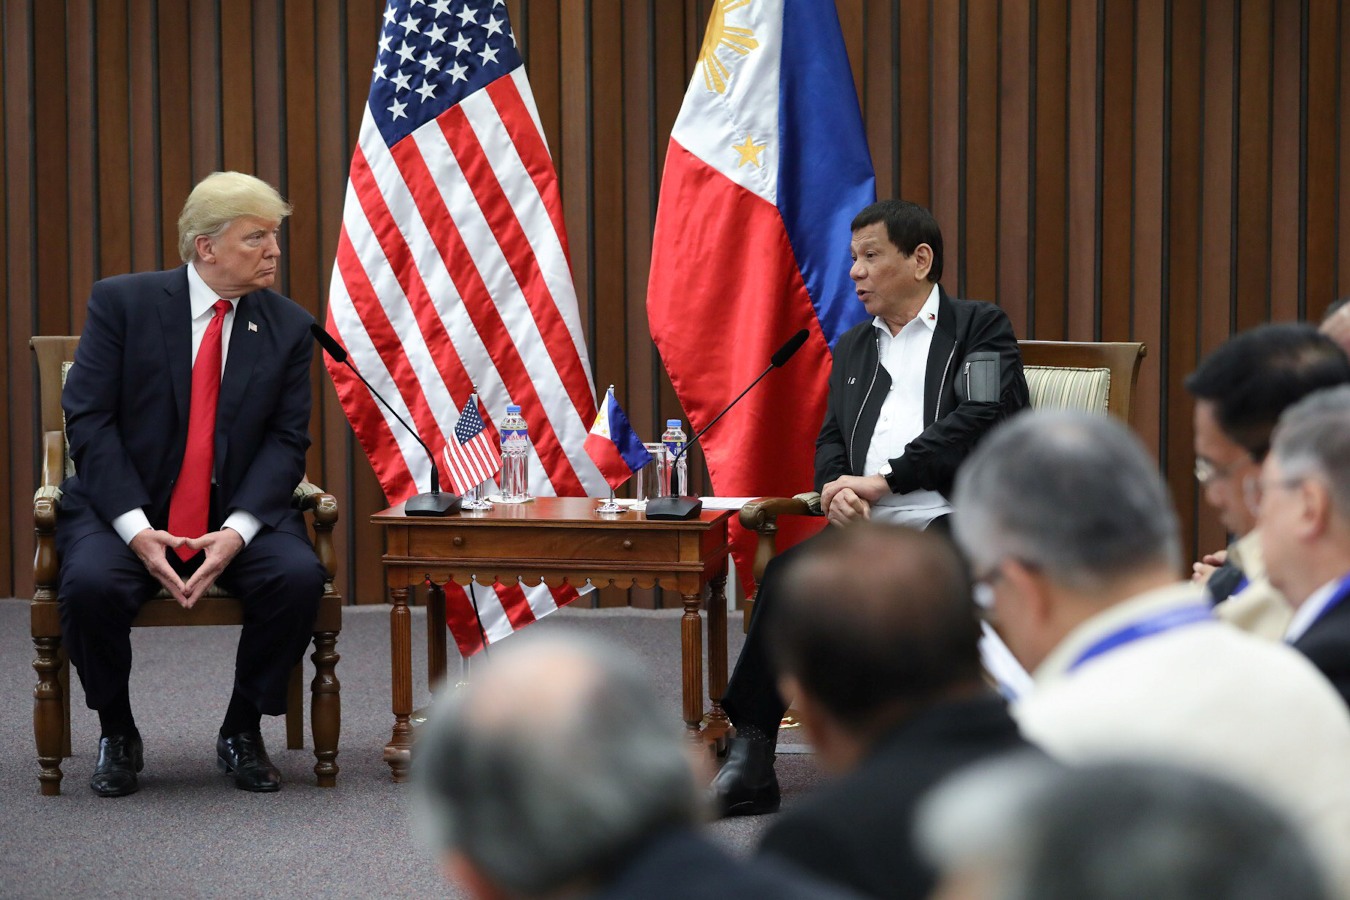 President Rodrigo Roa Duterte and US President Donald Trump discuss matters during a bilateral meeting at the Philippine International Convention Center in Pasay City on November 13, 2017. ROBINSON NIÑAL JR./PRESIDENTIAL PHOTO